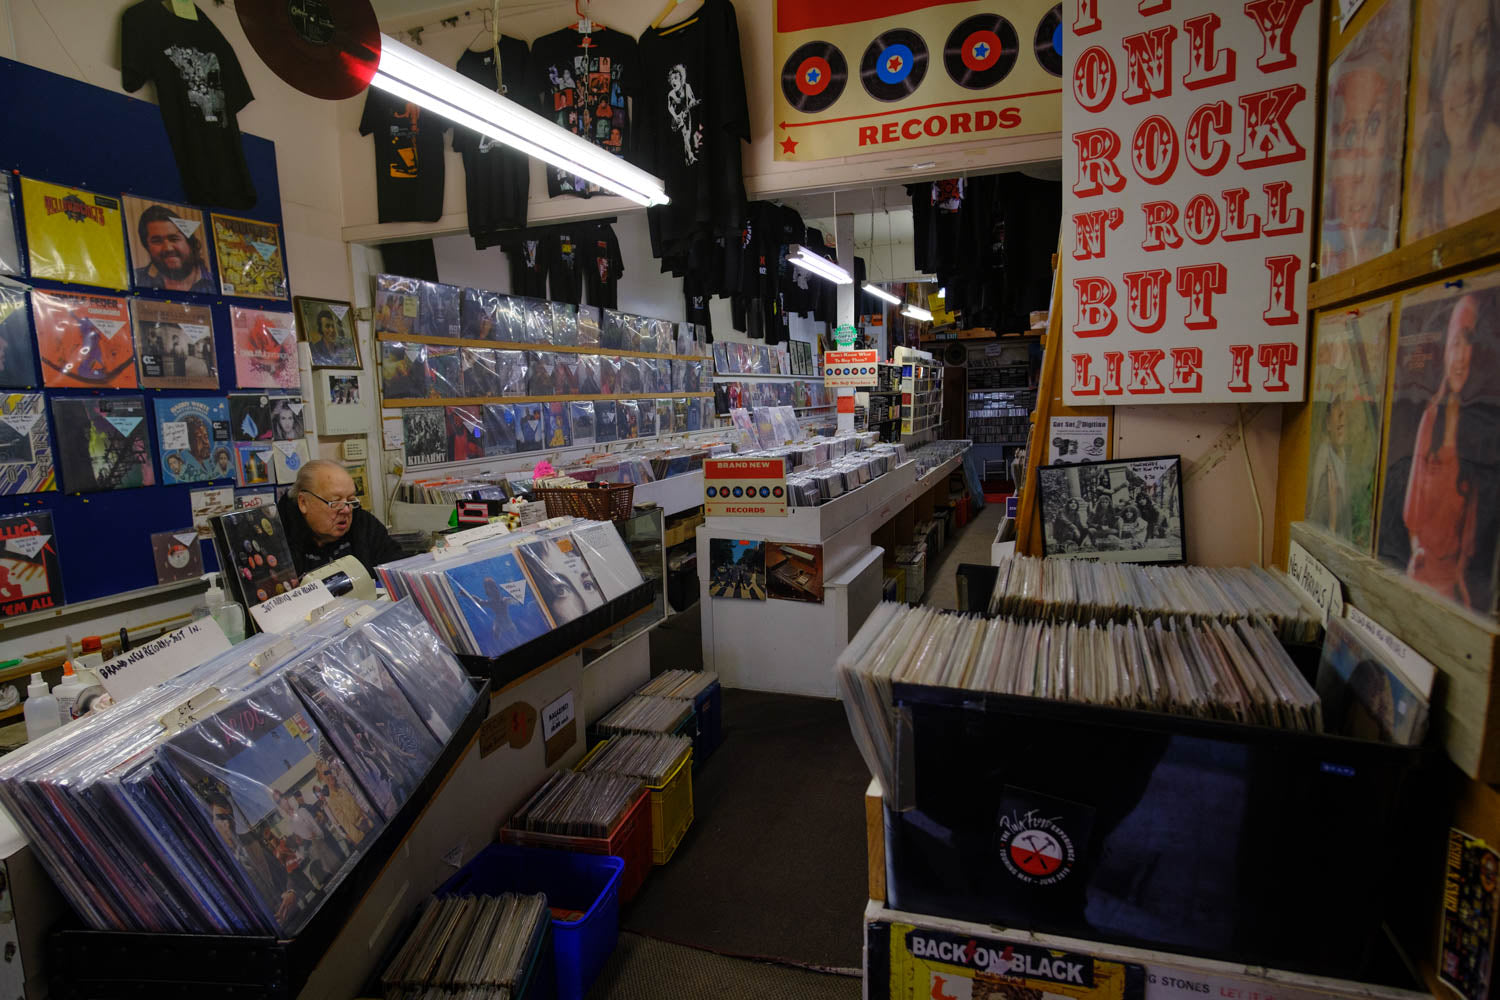 Lo-Cost Moon Hop Records - The Small Store With A Big Reputation